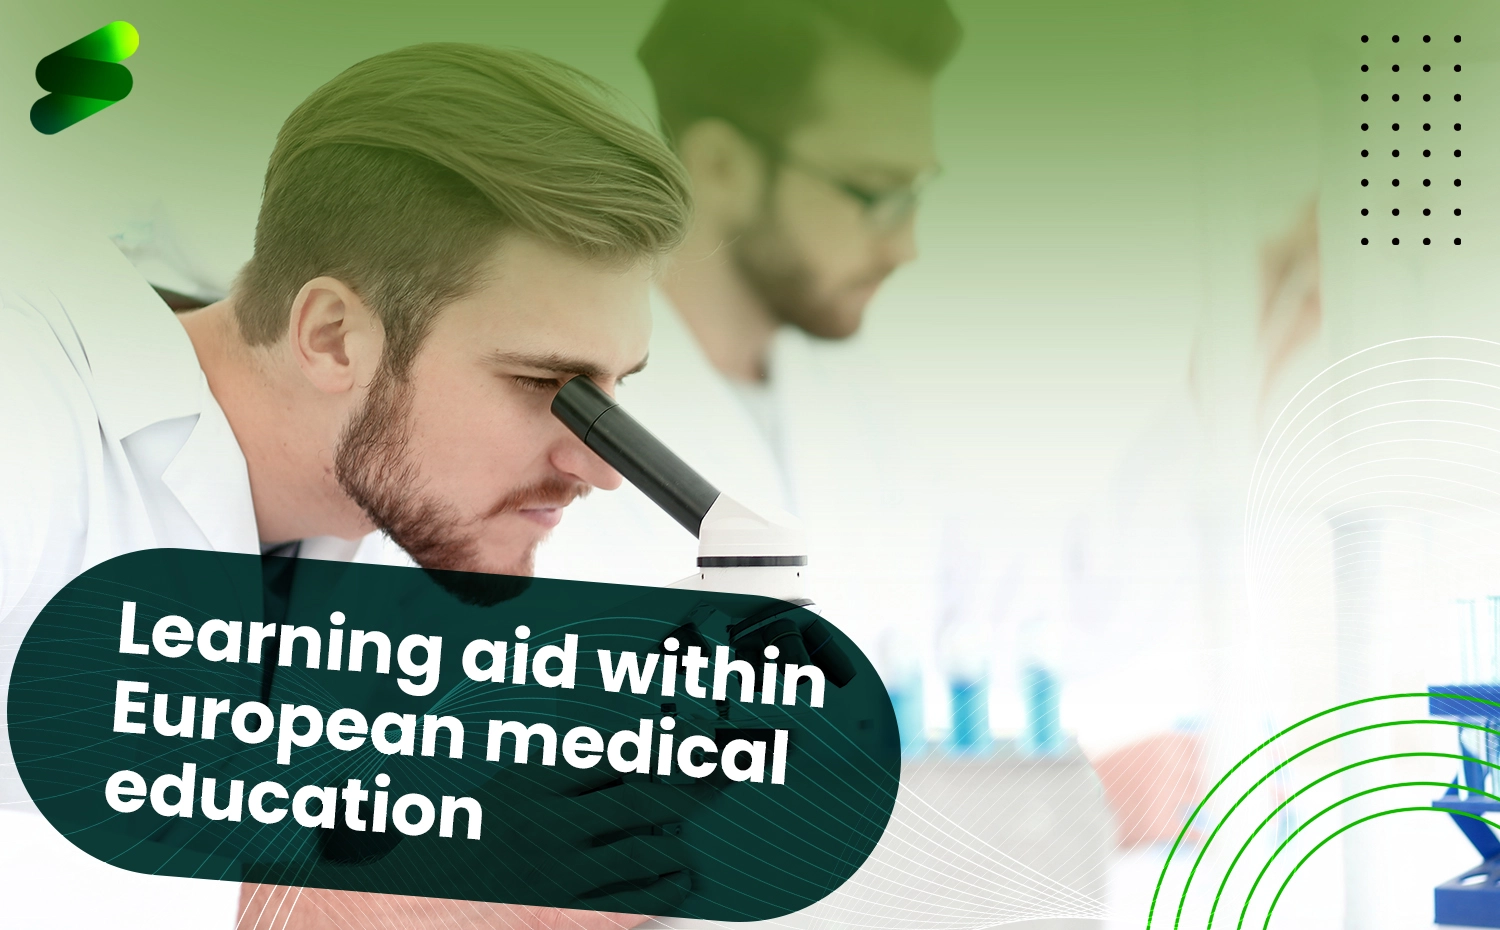 Learning aid within European medical education